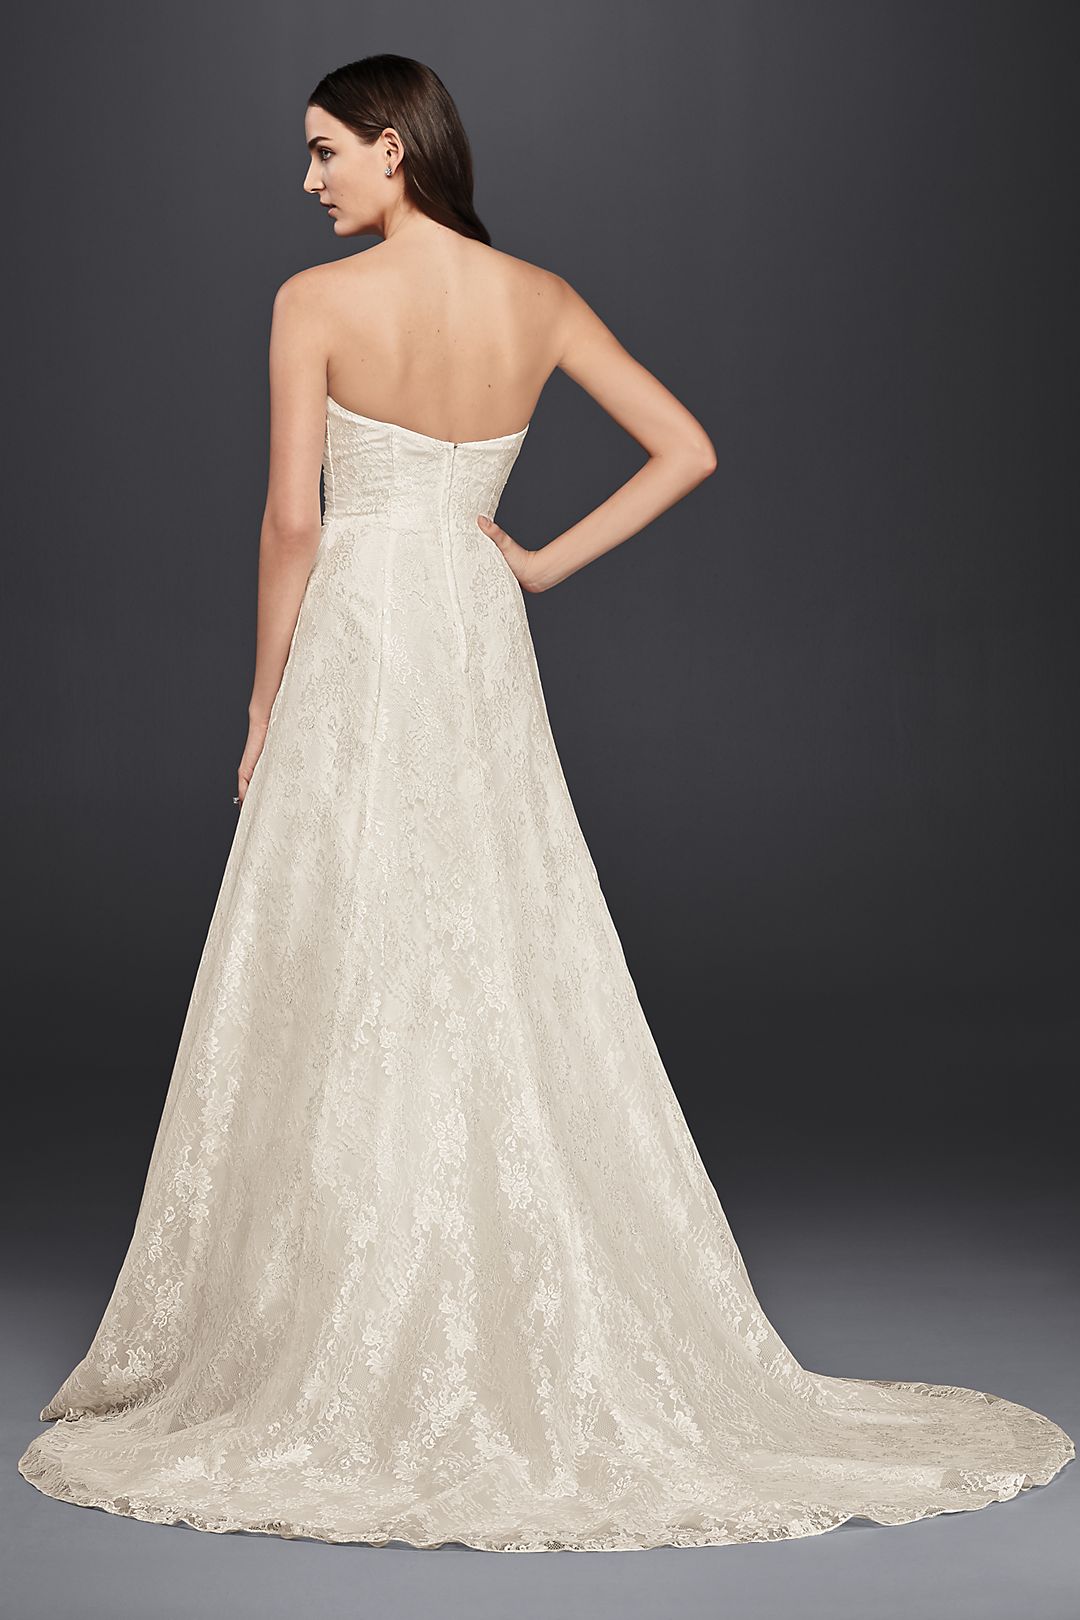 As-Is Lace A-Line Strapless Wedding Dress Image 4